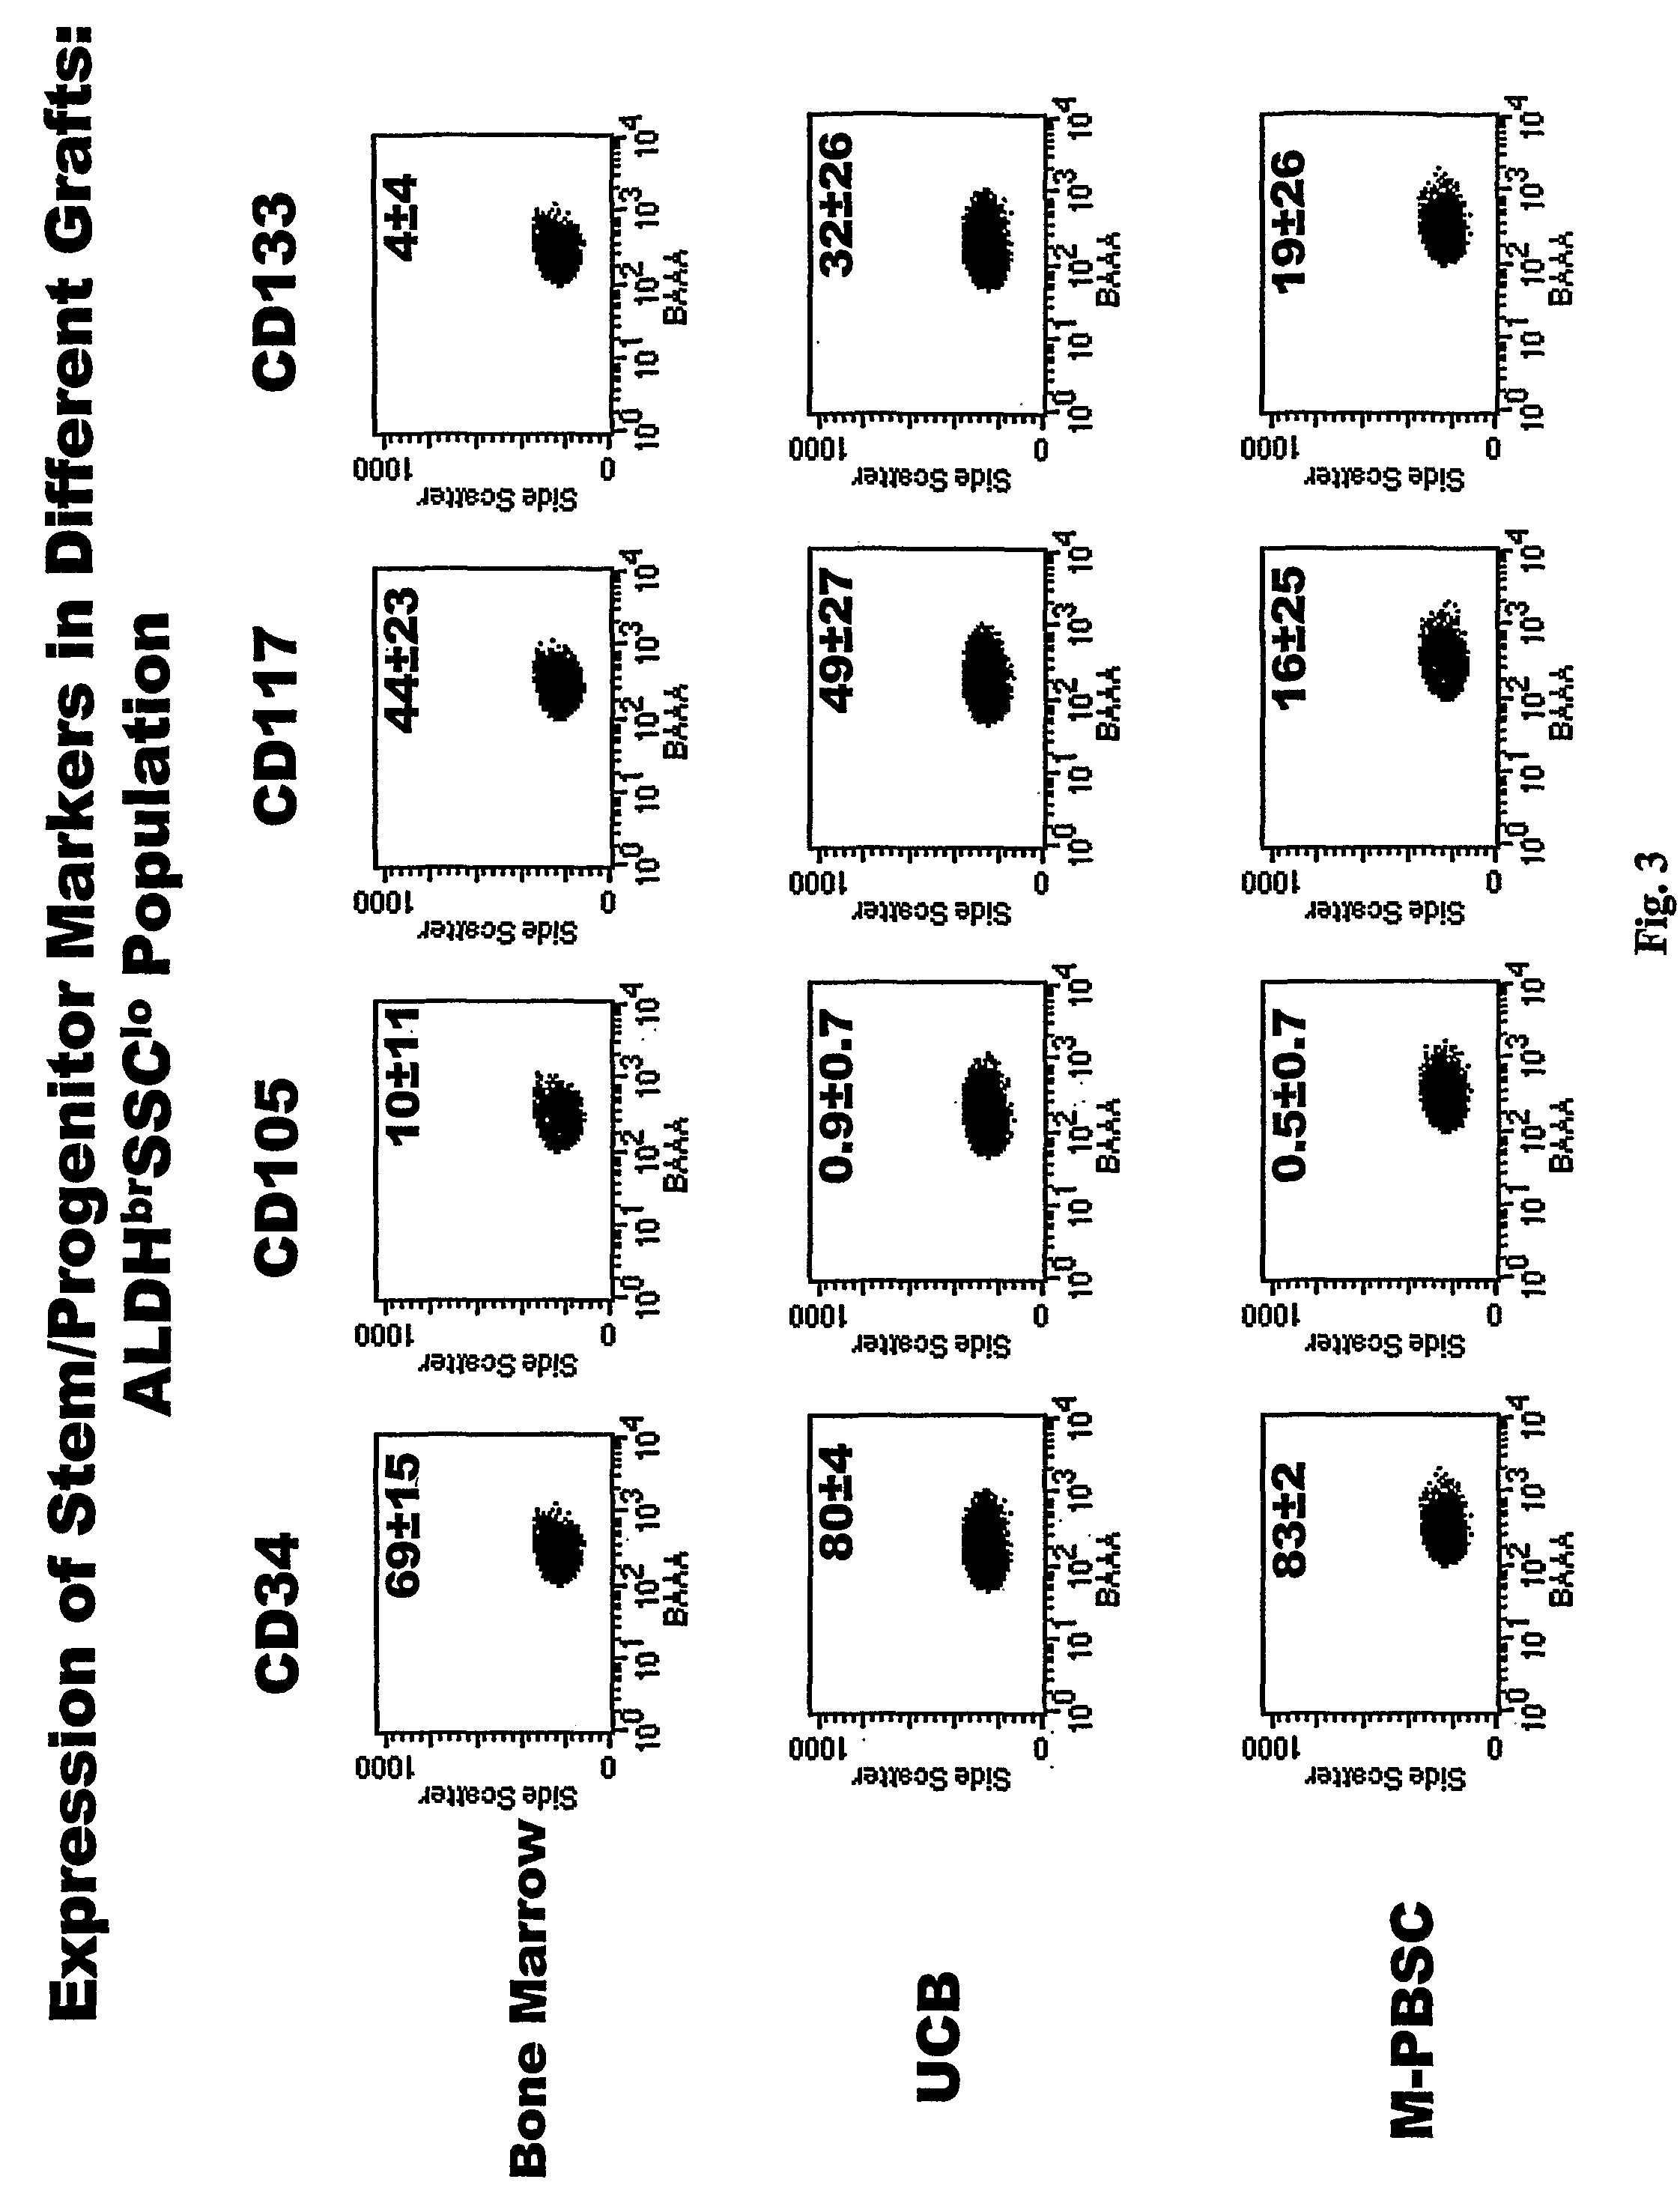 Stem cell populations and methods of use